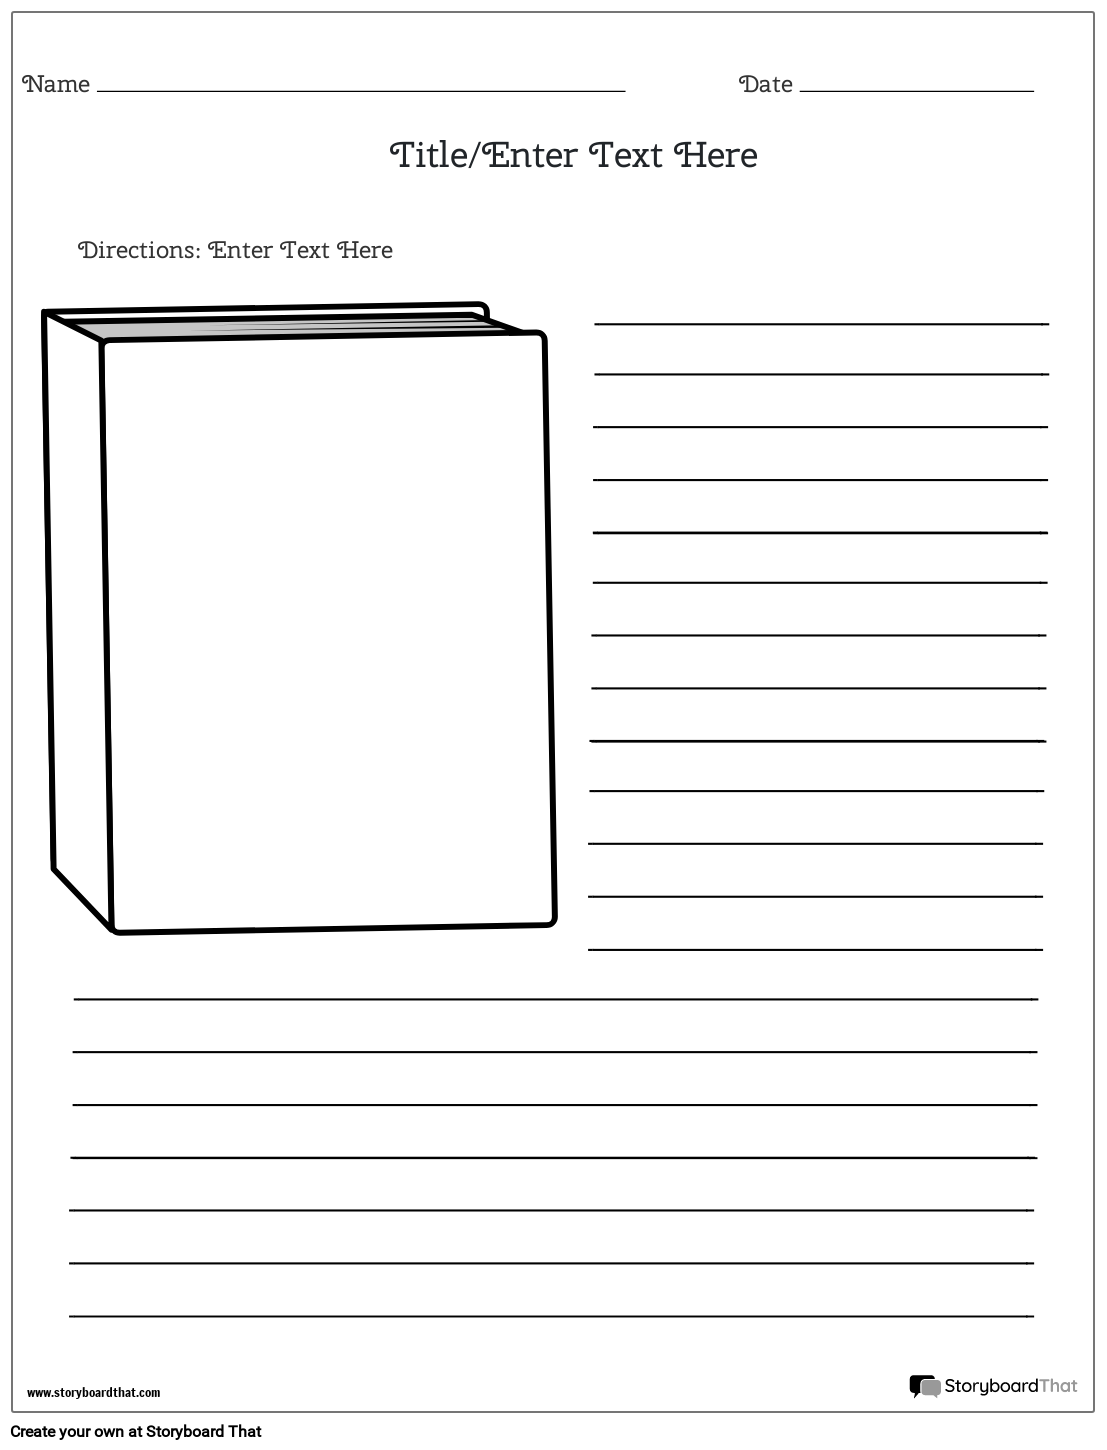 book template png